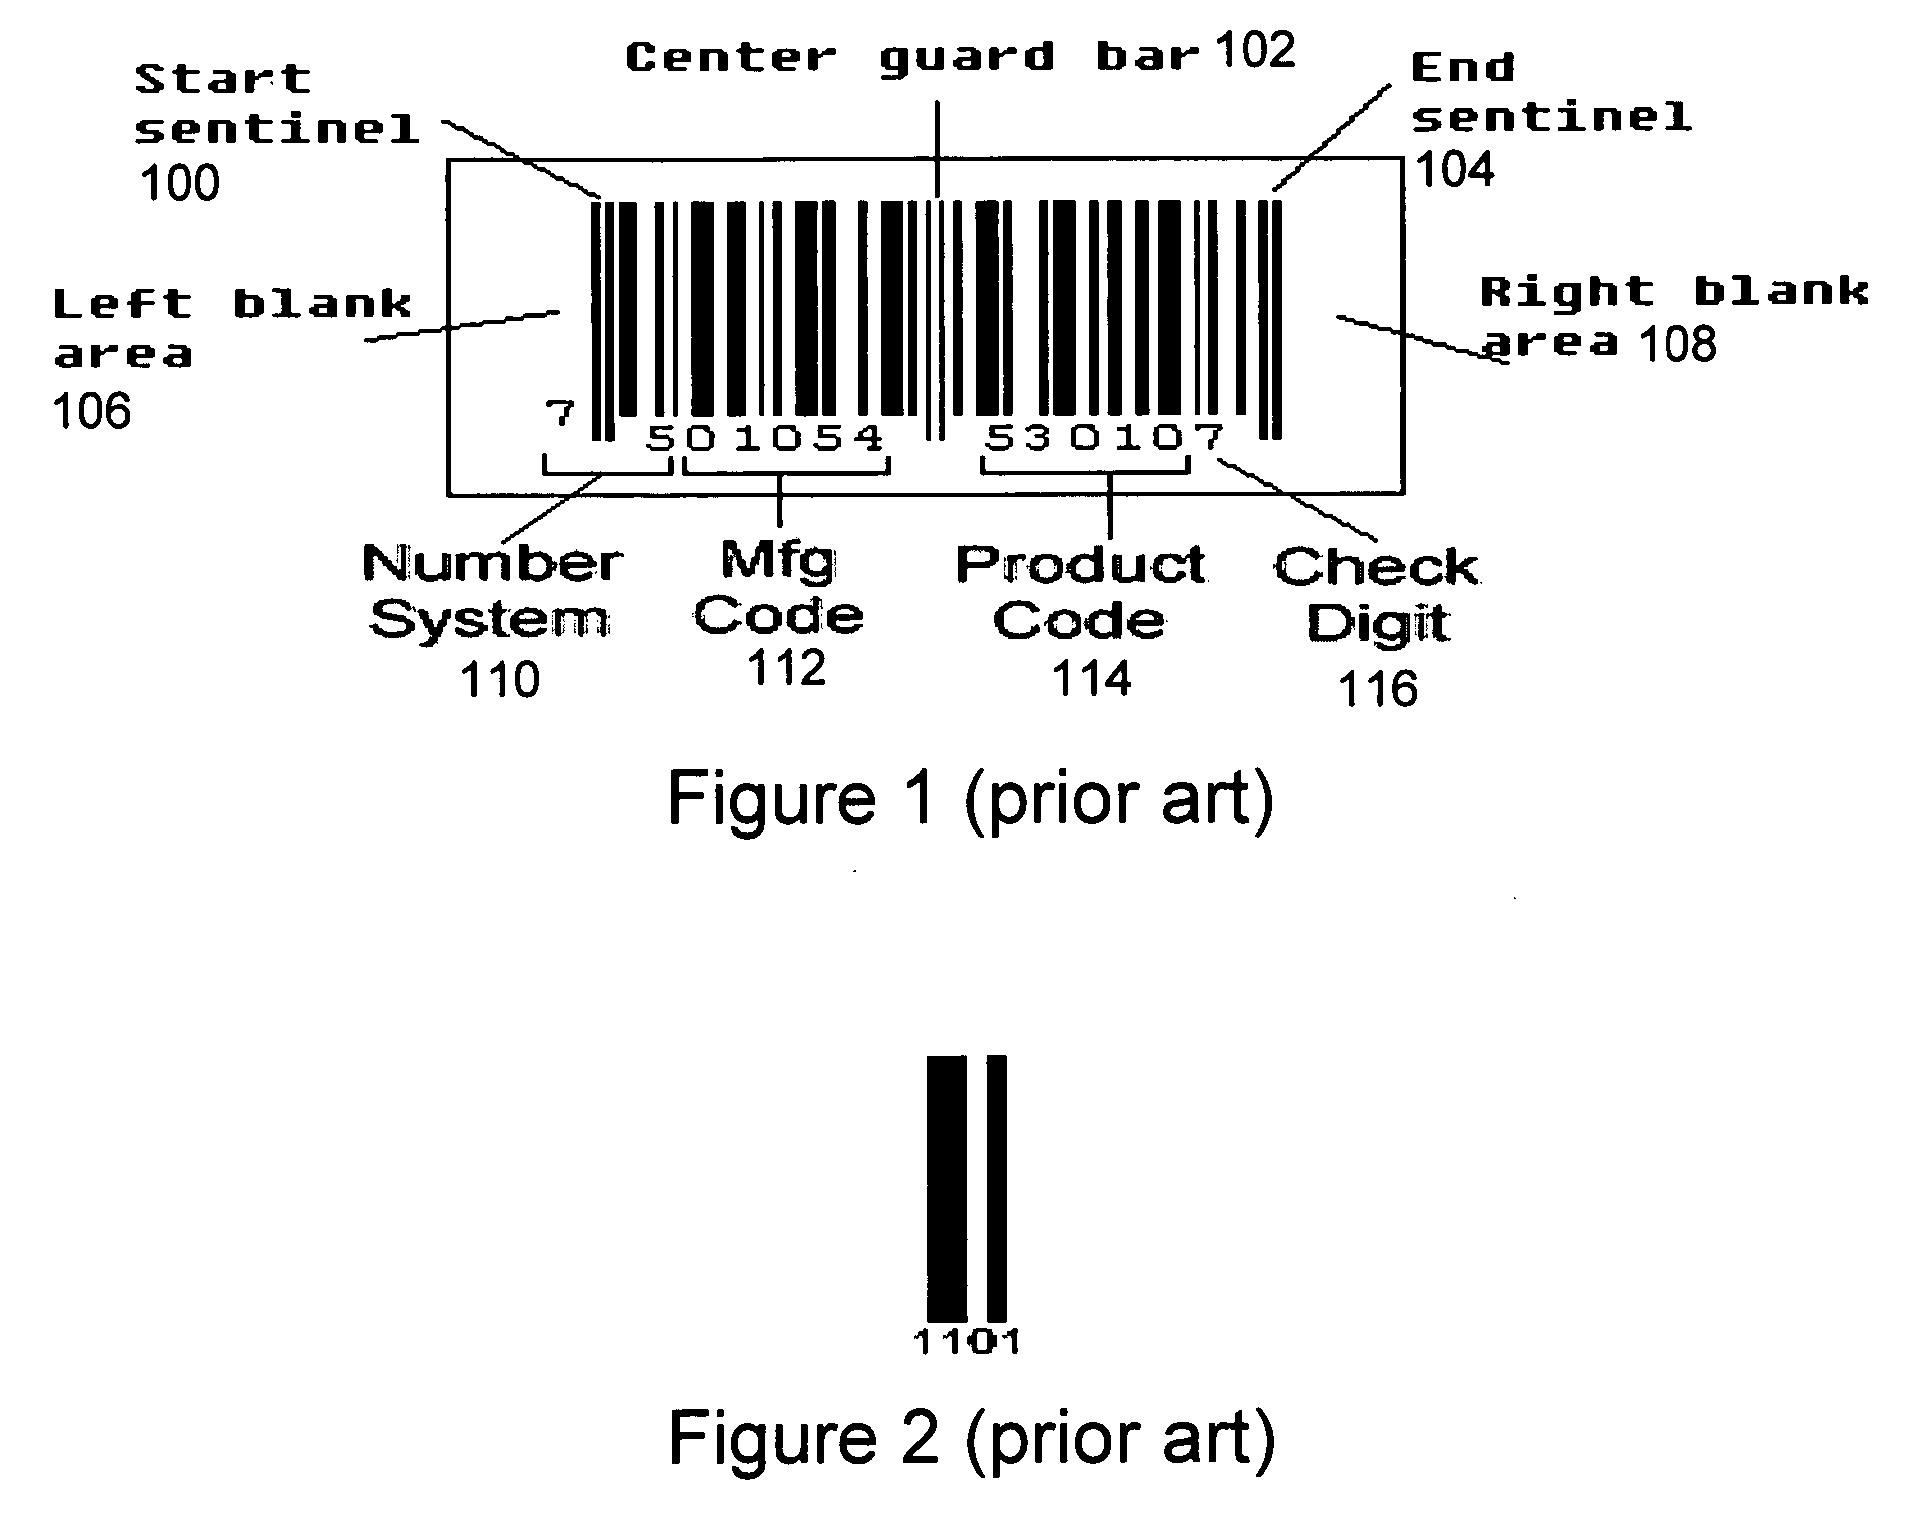 Camera-based barcode recognition